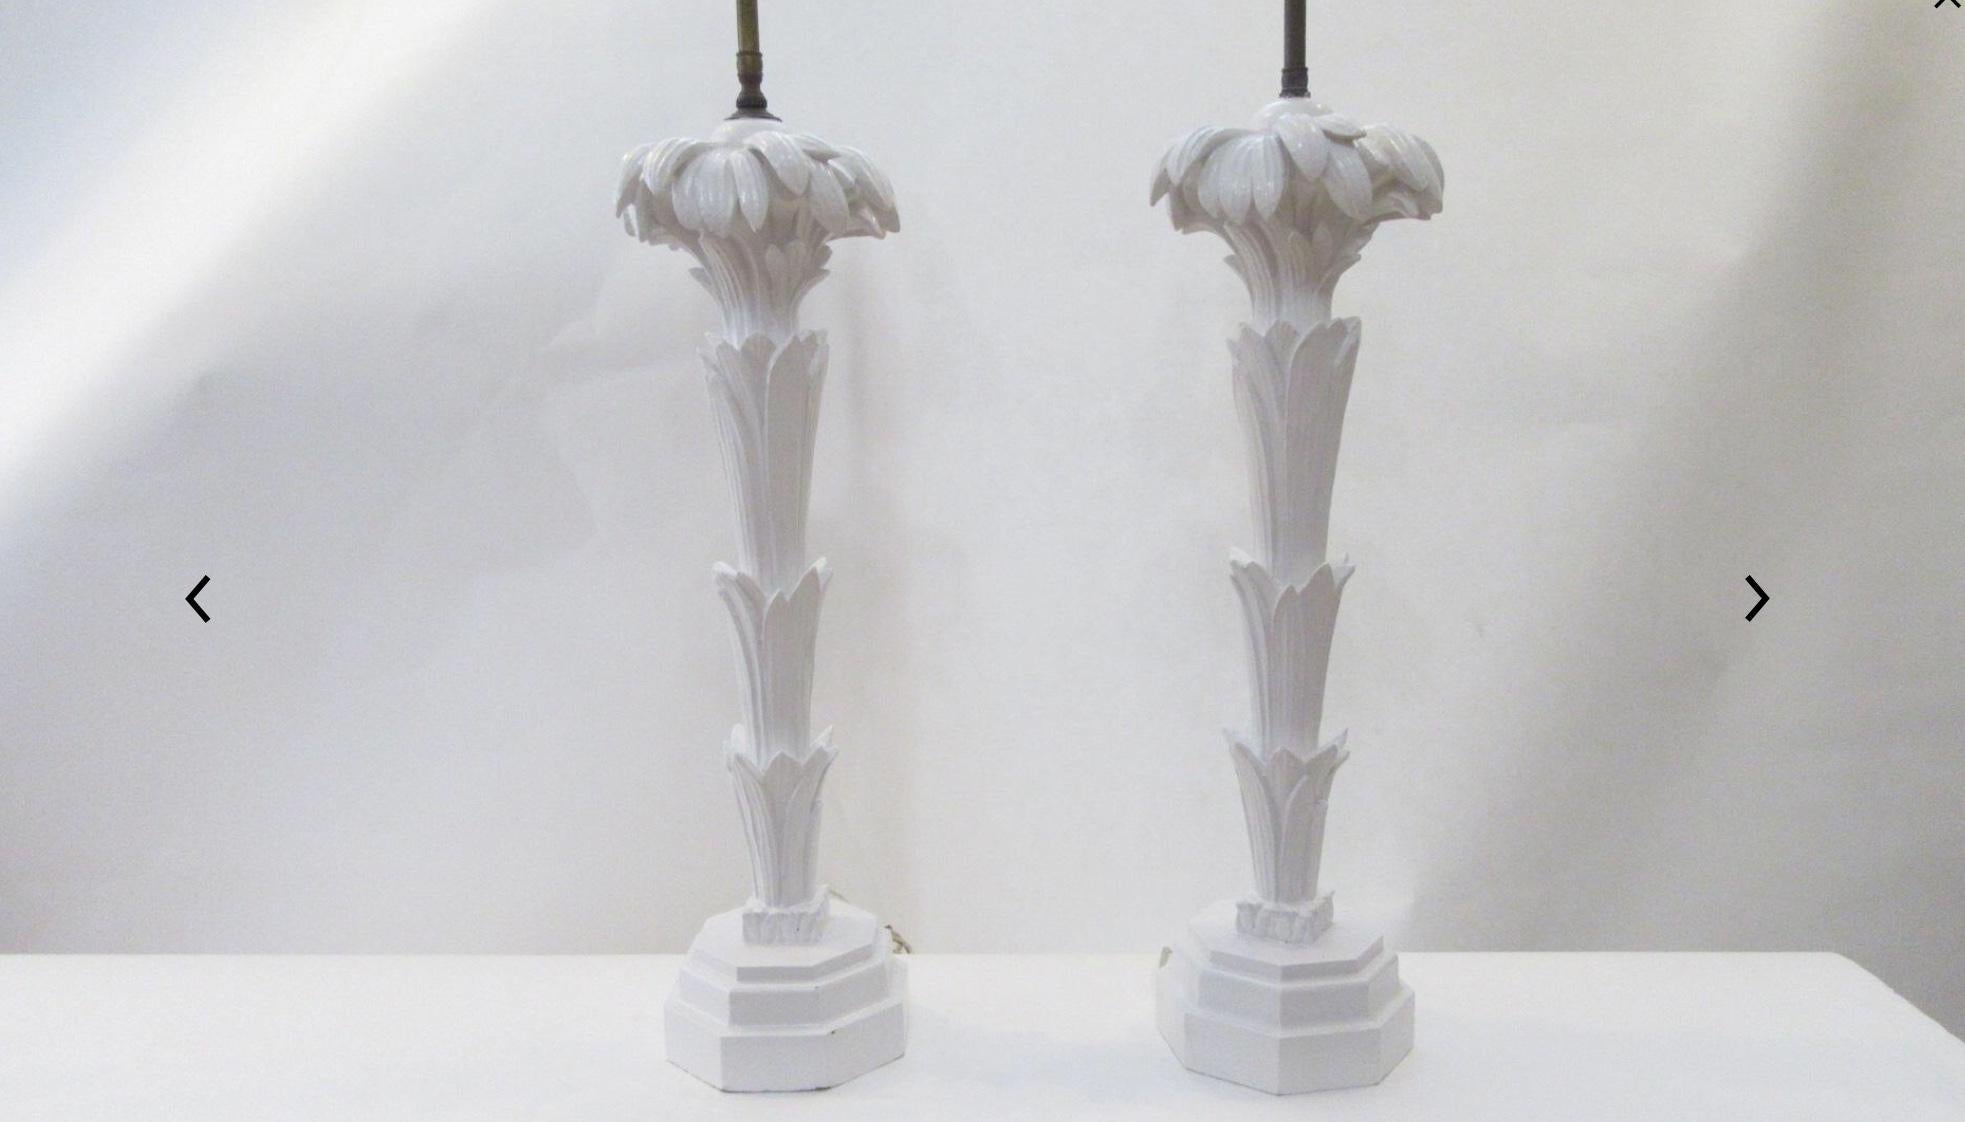 Midcentury Hollywood Regency style wooden palm tree table lamps. Painted white finish. Working condition.
Newly painted finish, not original finish.